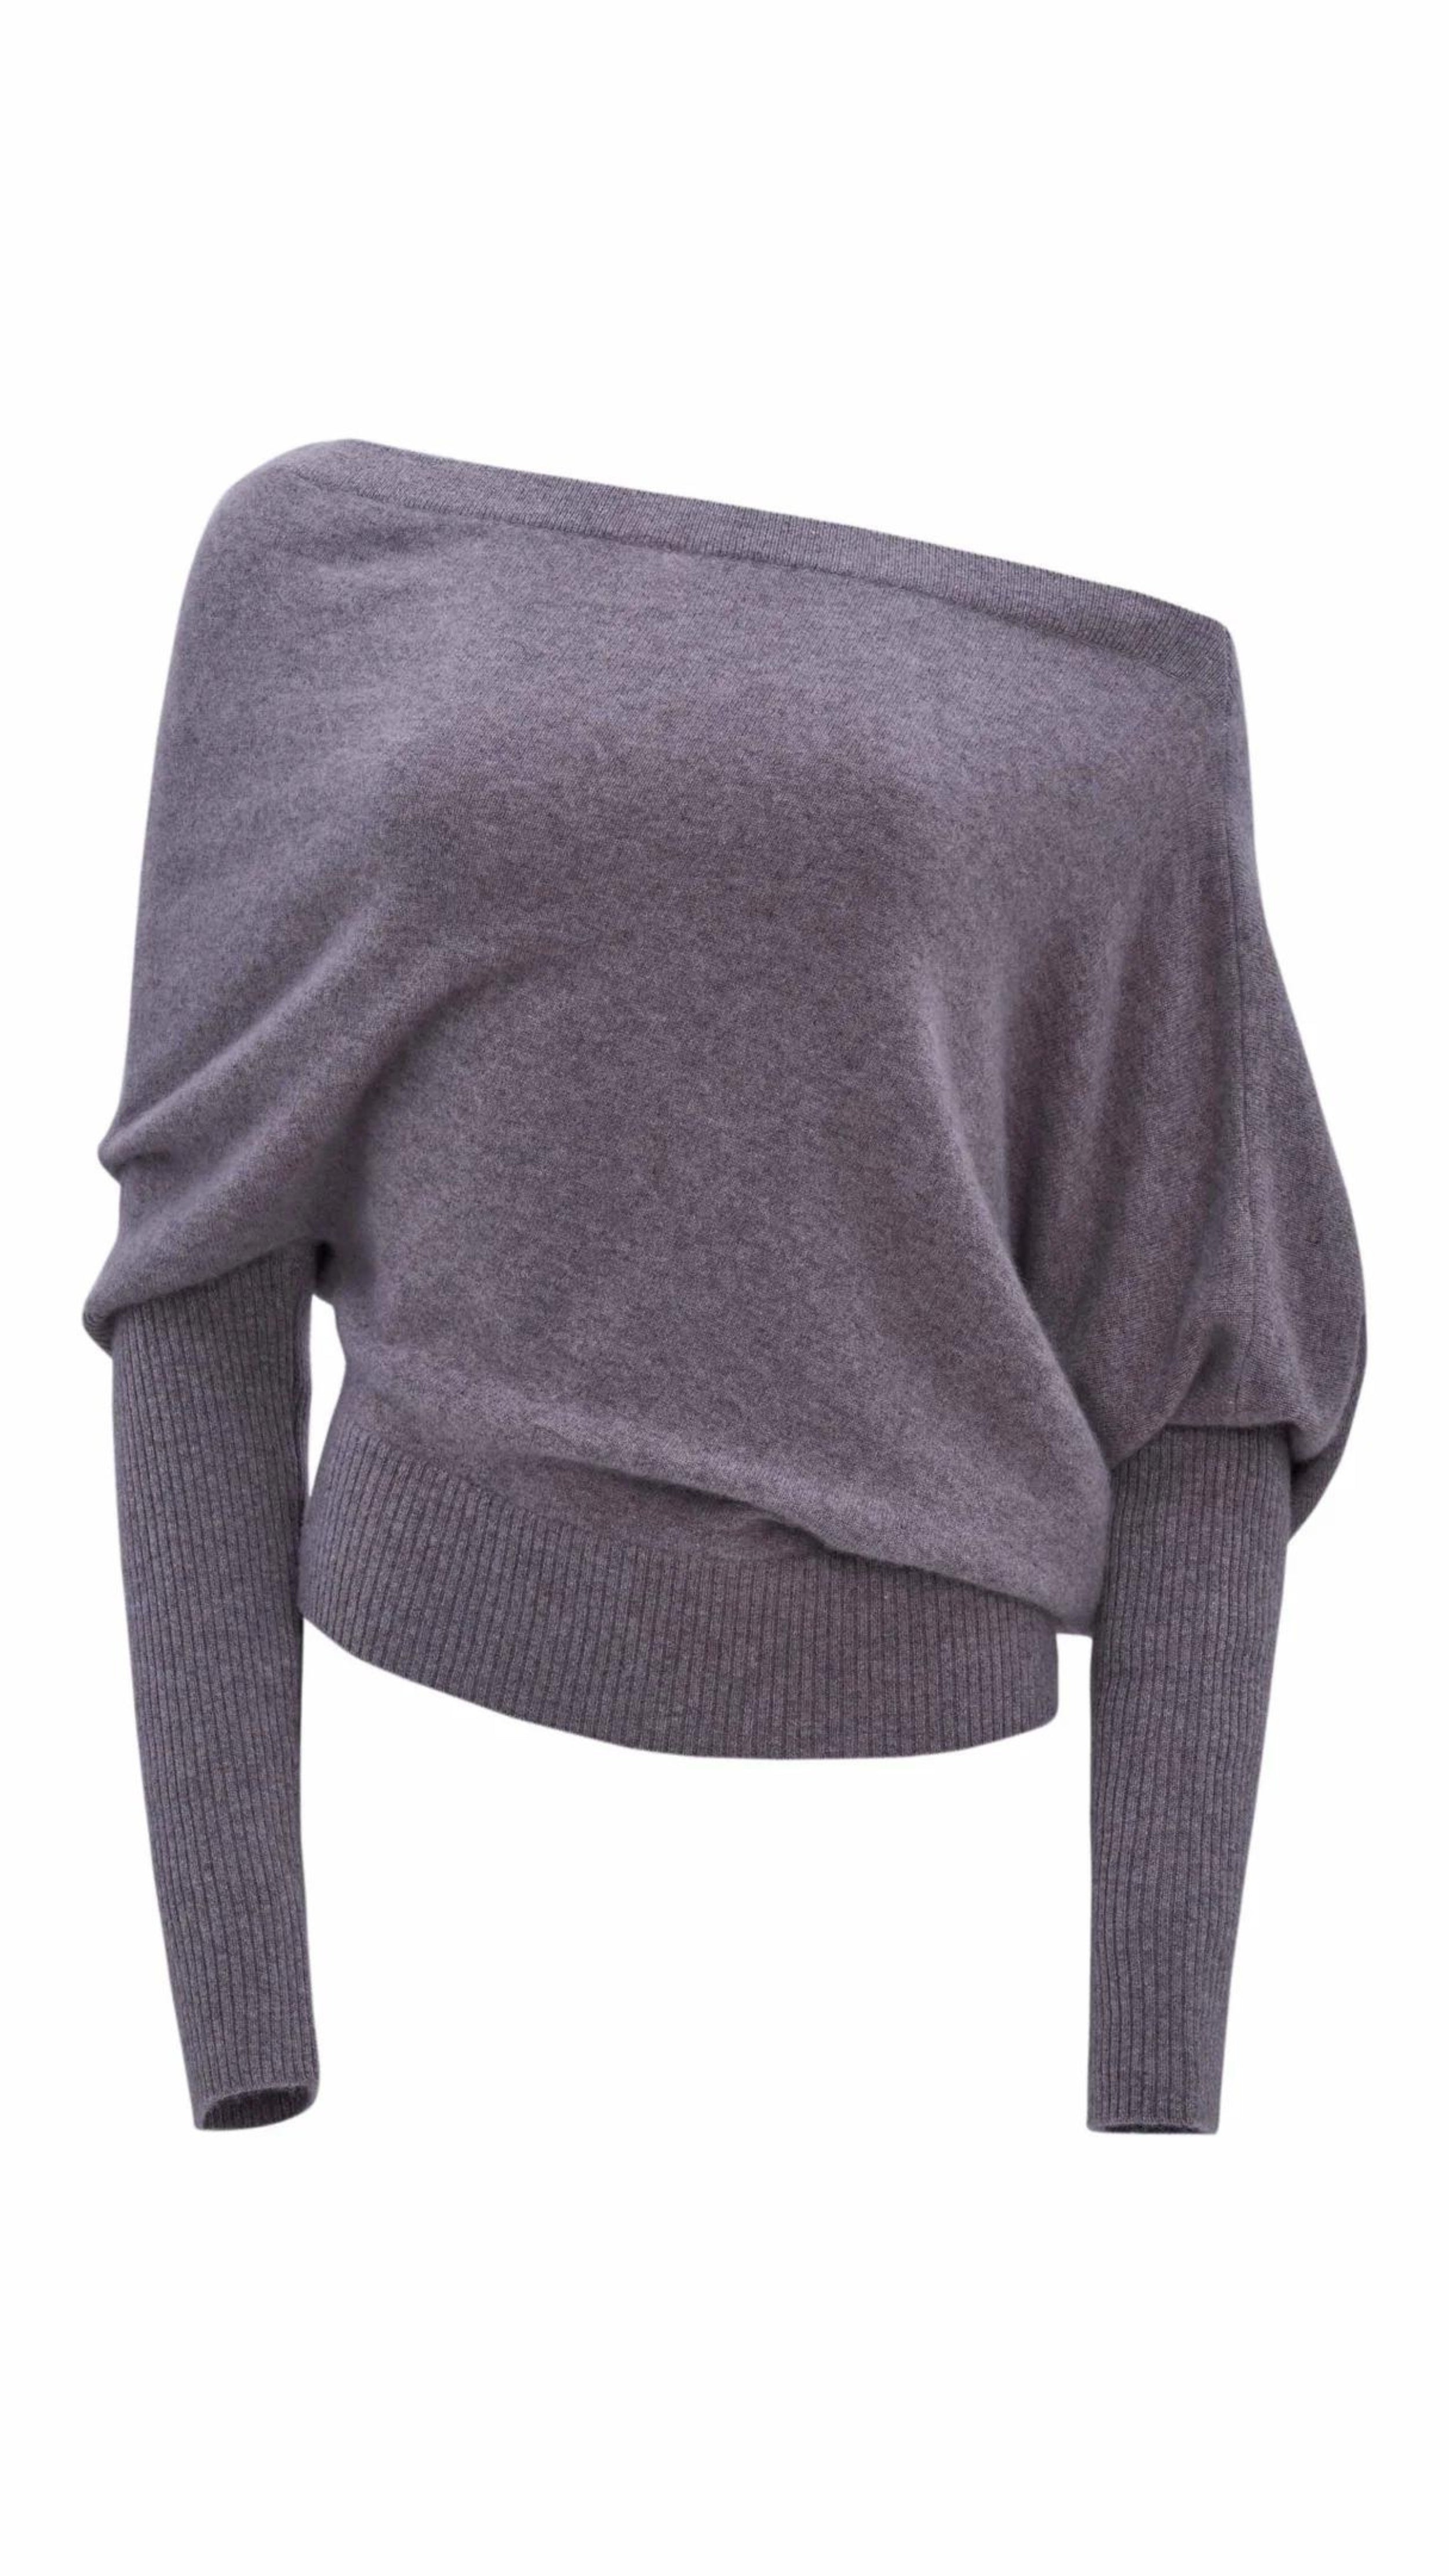 Altuzarra Paxi Cashmere Sweater in Grey. Luxury soft knit jumper in light gray, off the shoulder style. With a fitted waist line and sleeves for an elegantly casual look. Product photo front side.